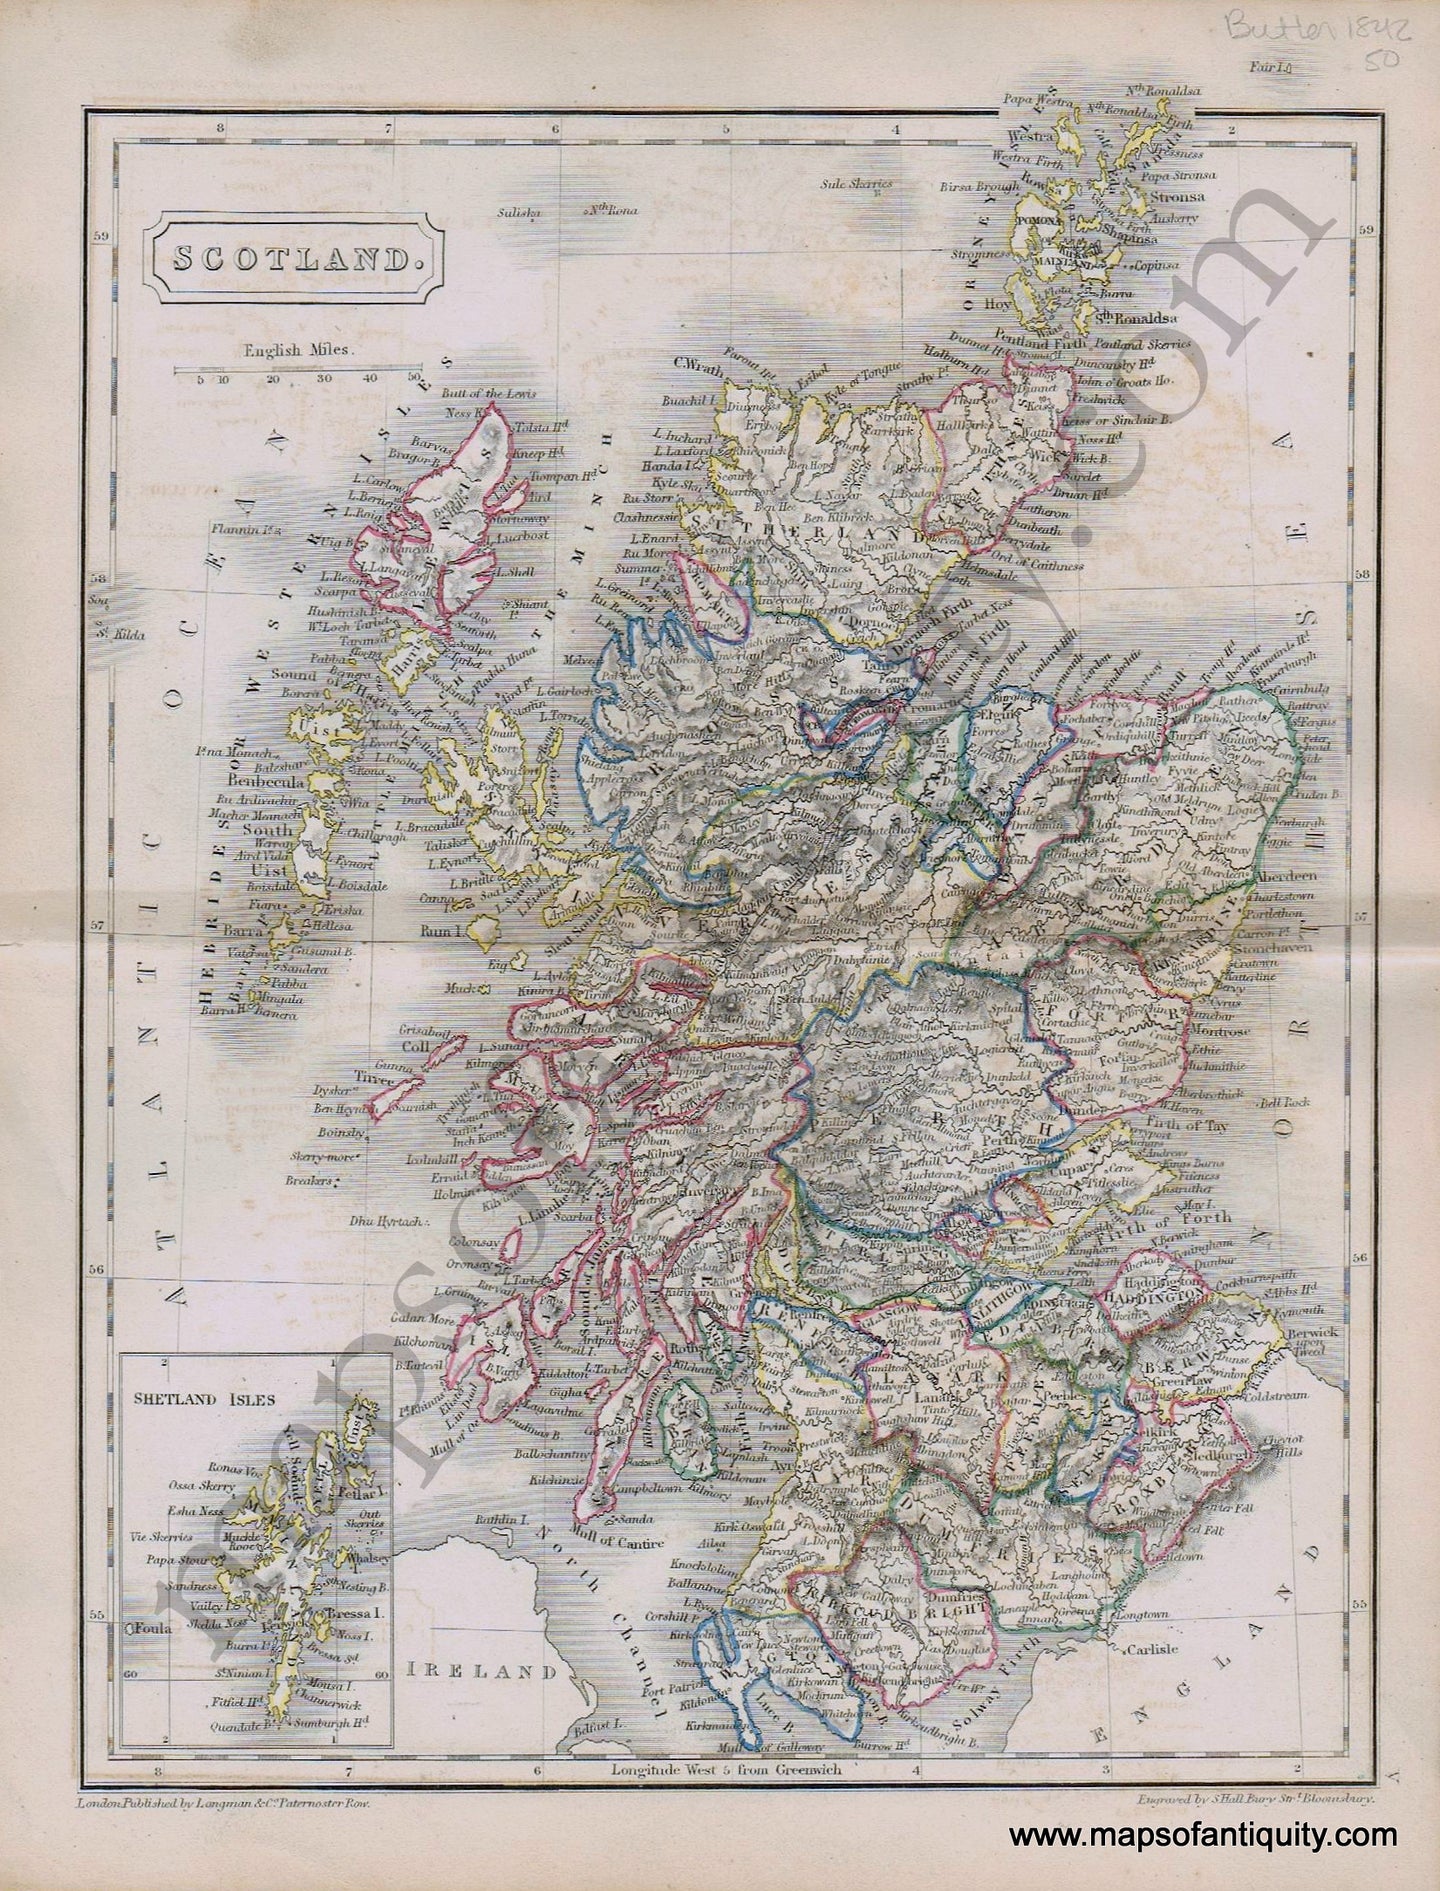 Antique-Hand-Colored-Map-Scotland.-1842-Butler-Scotland-1800s-19th-century-Maps-of-Antiquity